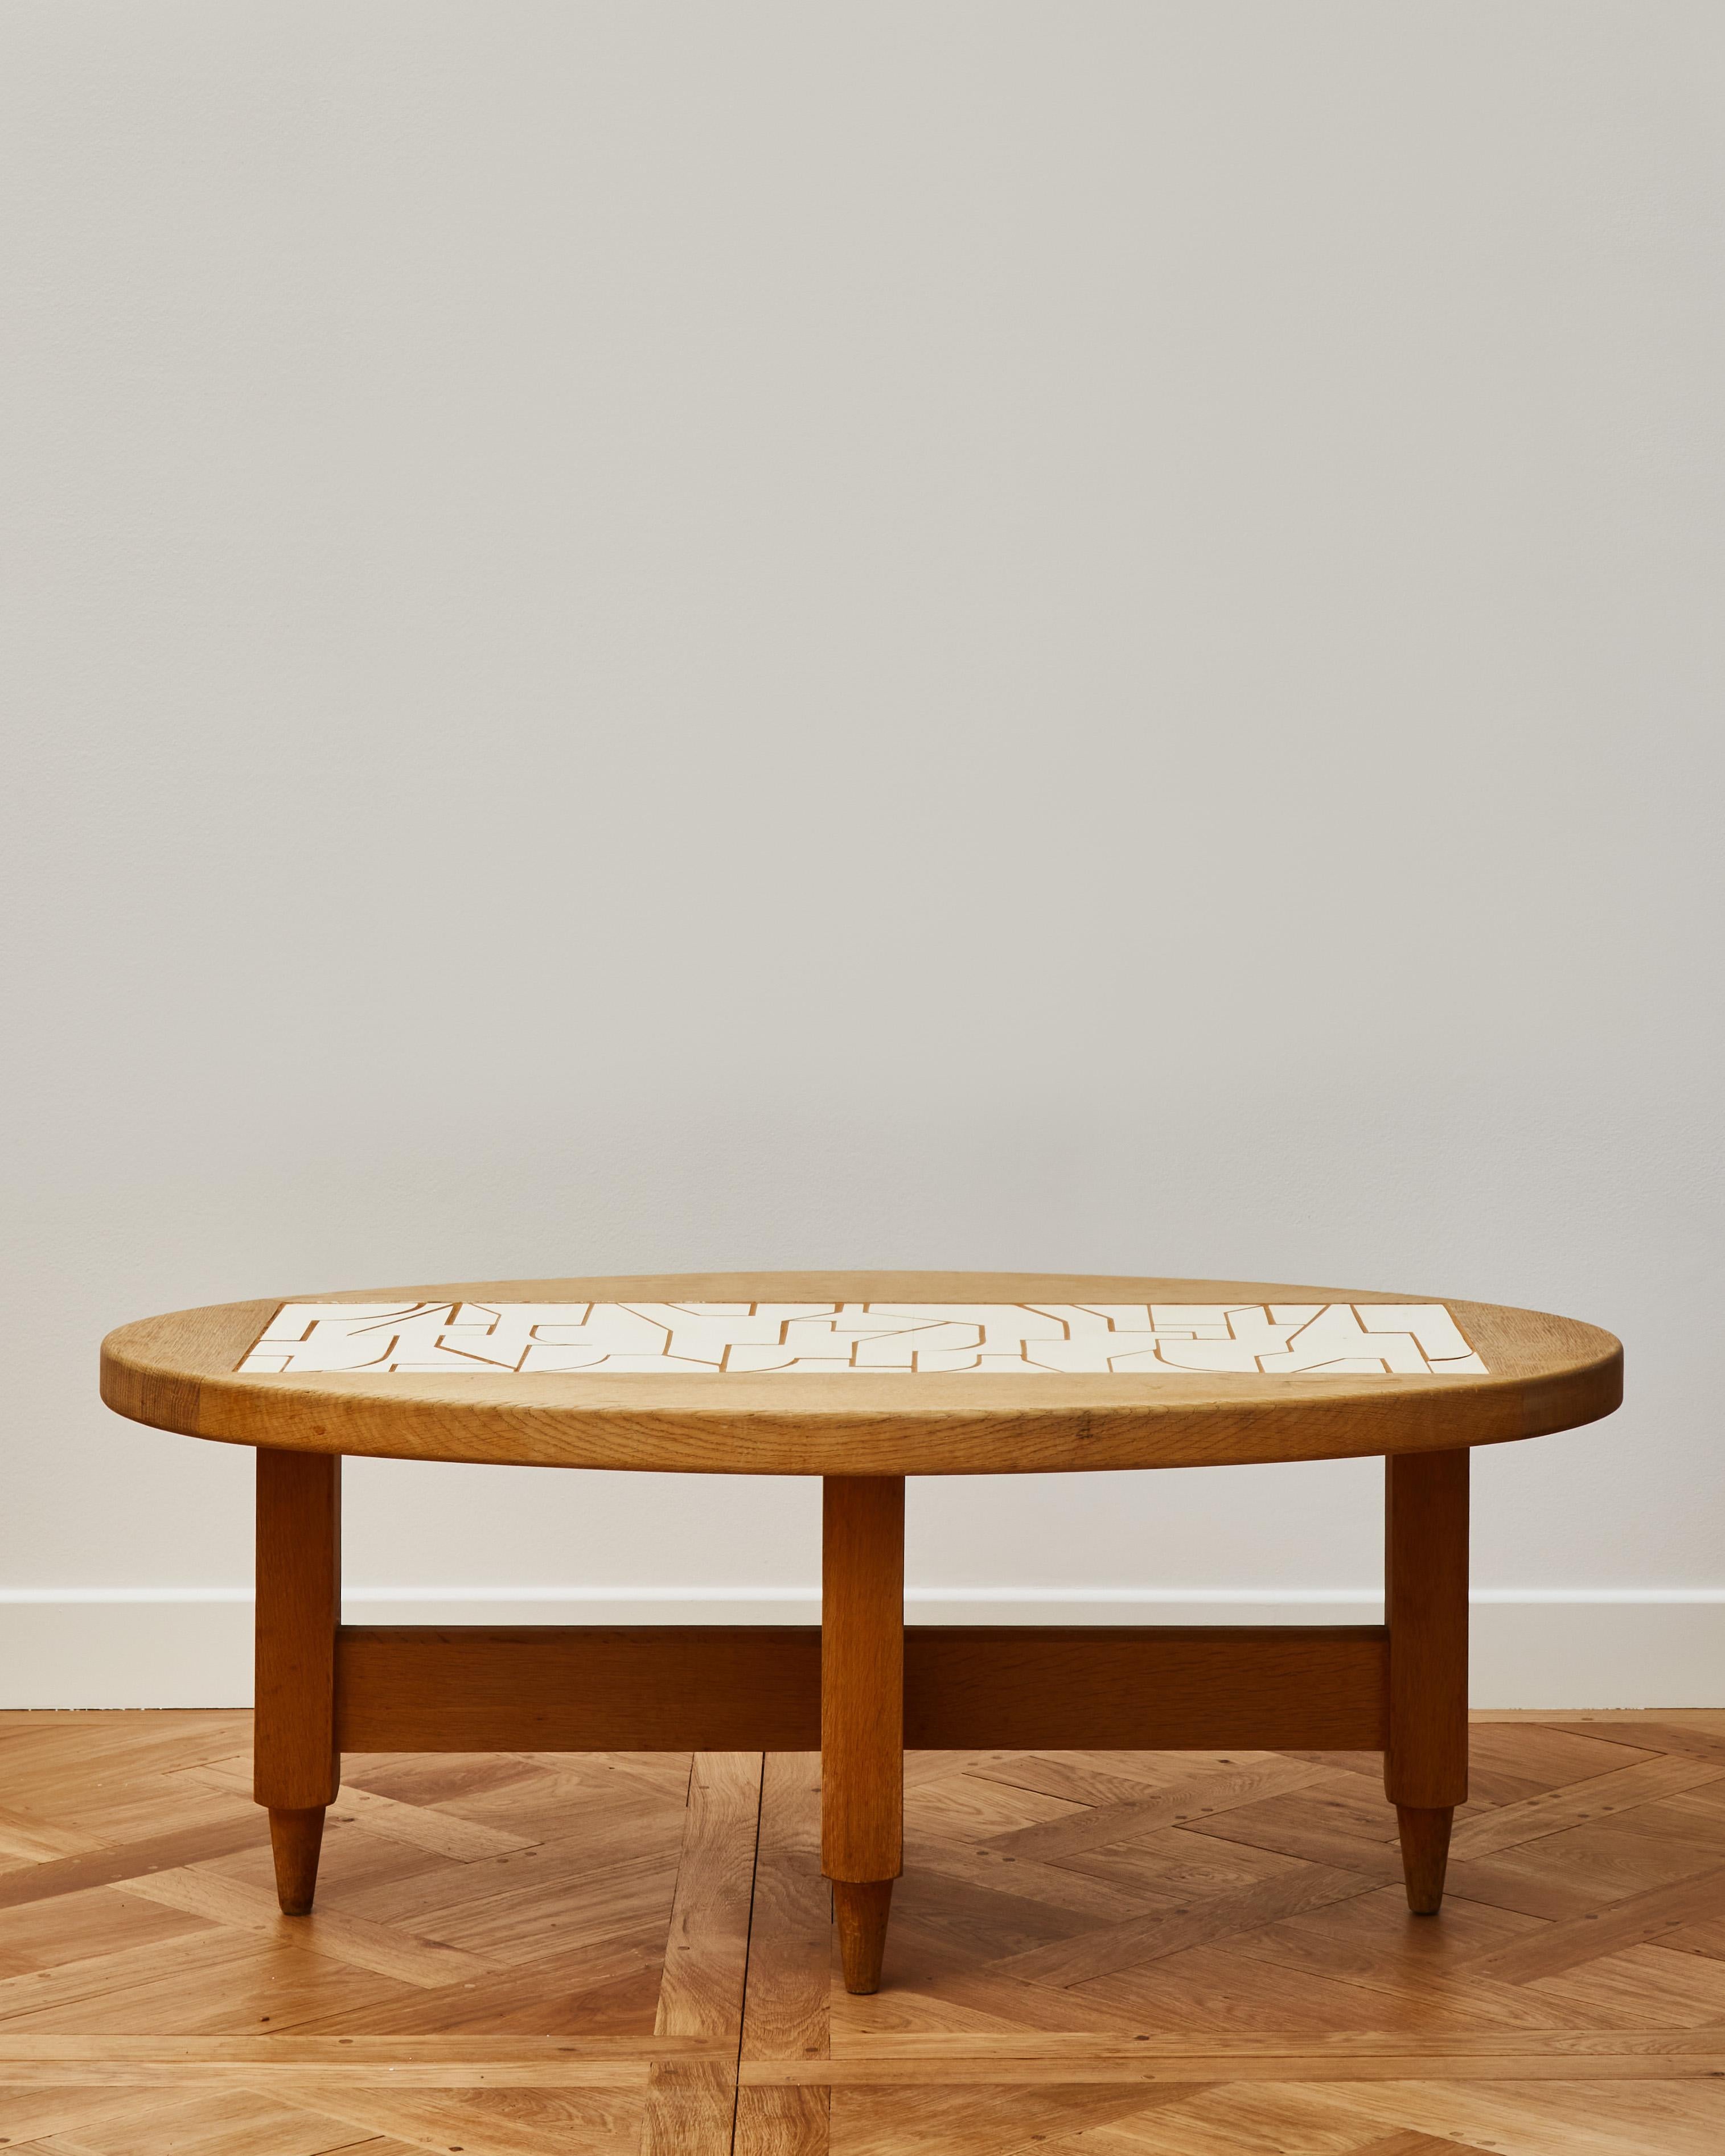 Oval shaped oak coffee table with white ash inlay by the French maker François Weiss.